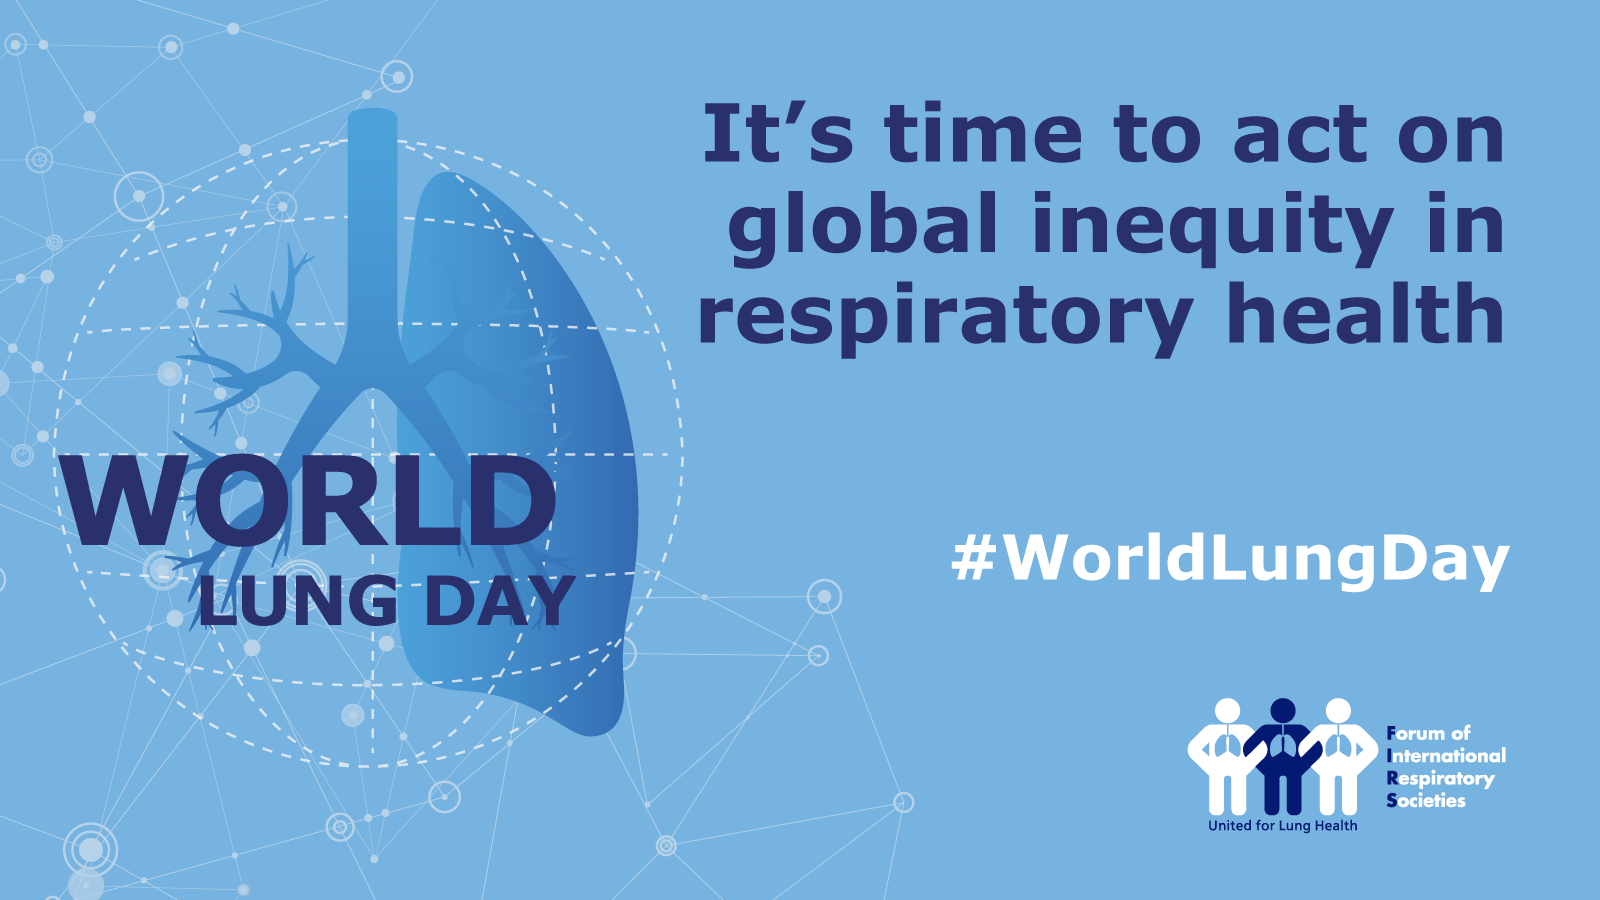 On World Lung Day, we call for action to tackle global inequity in respiratory health